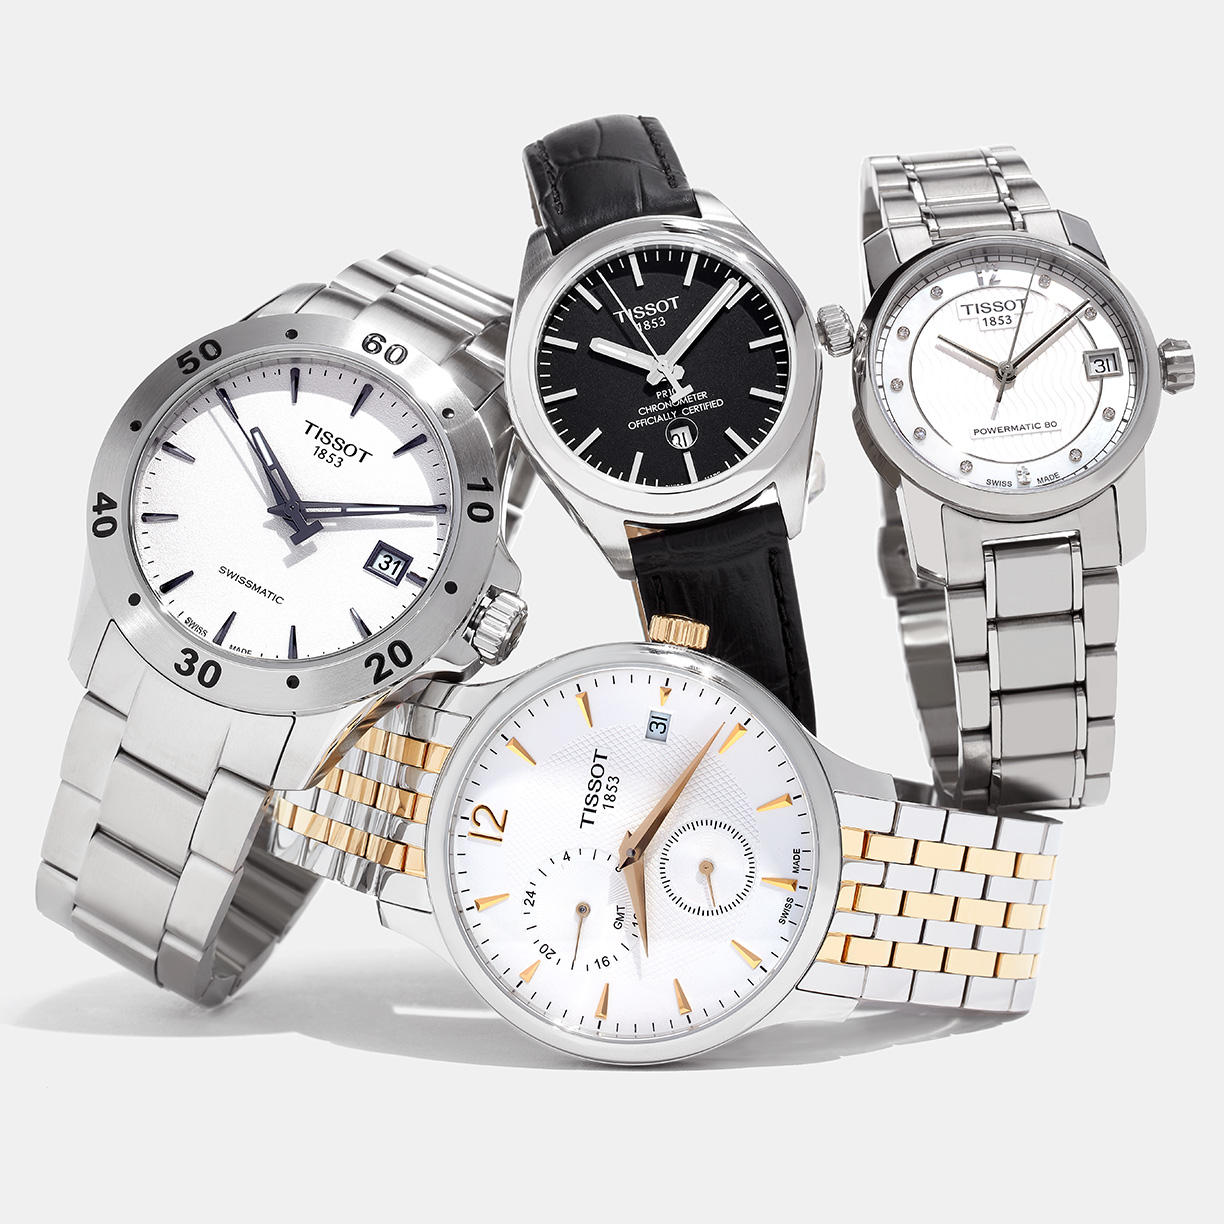 Men's Classic Watches Up to 45% Off Feat. Tissot